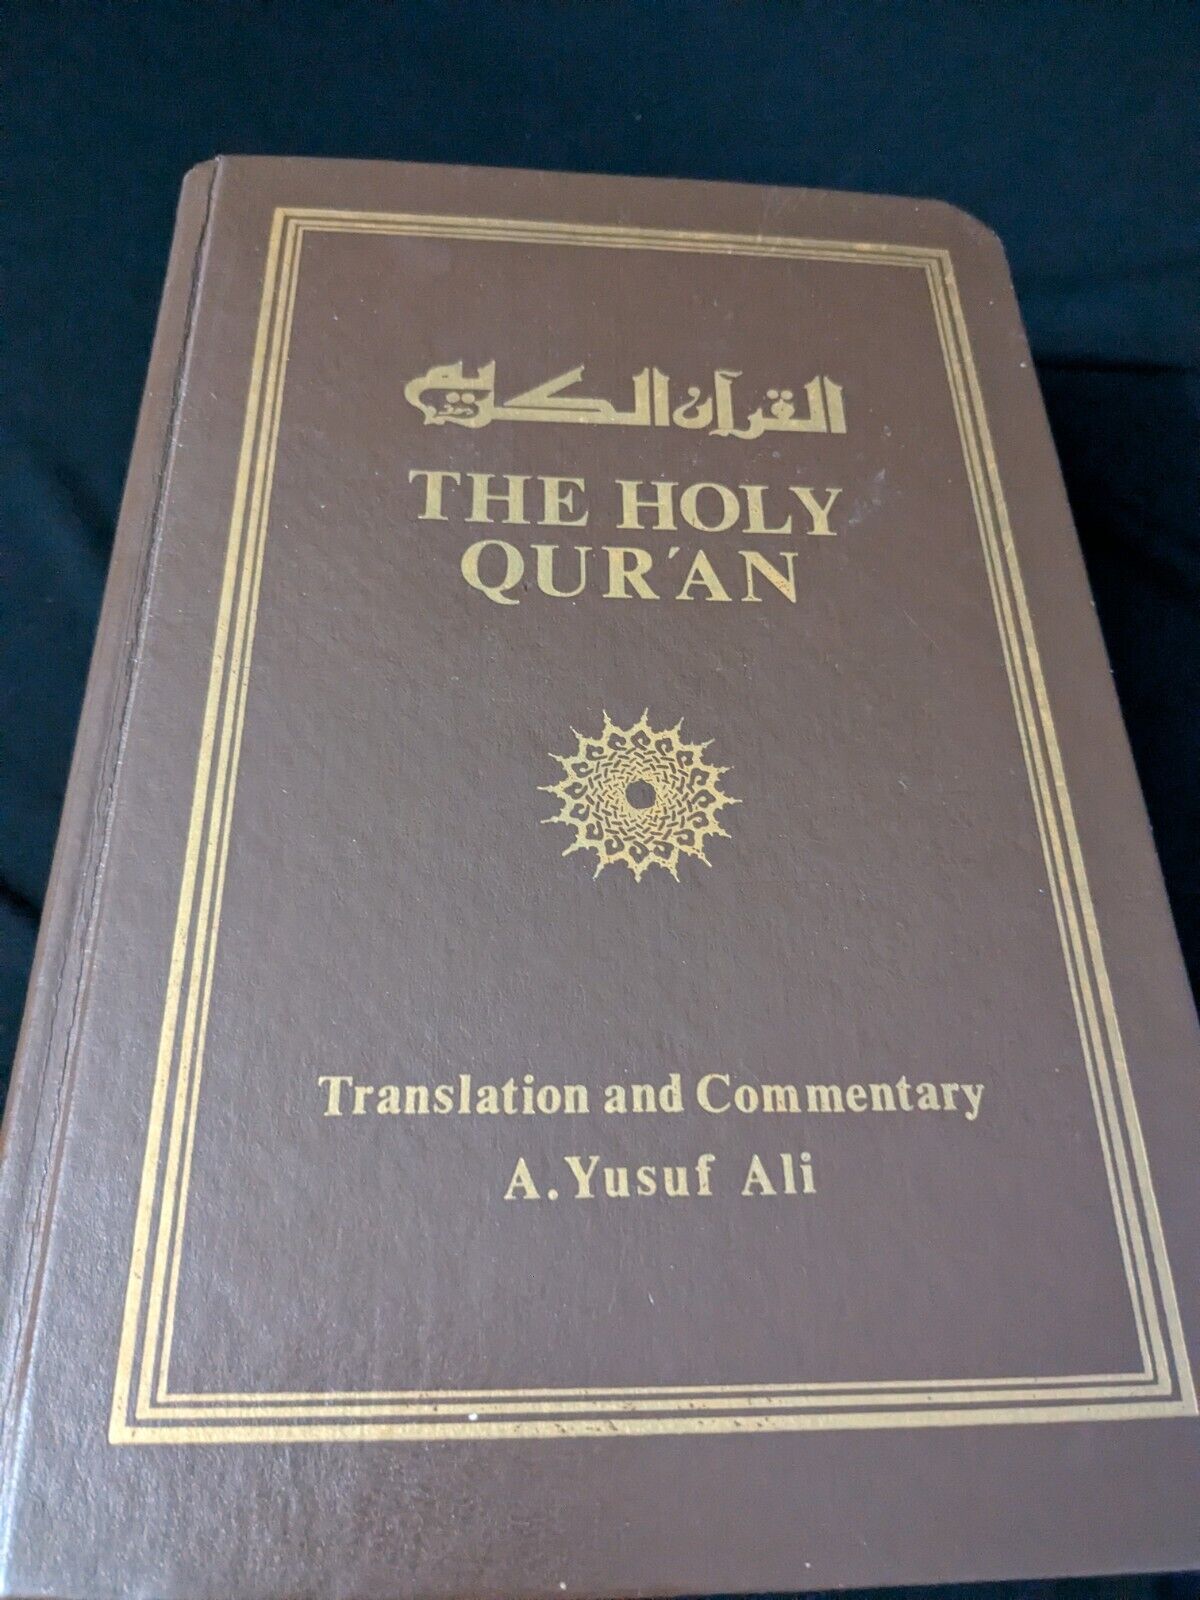 Vtg 1977 Copy Of The Holy Qur'an With Translation And Commentary Hardcover